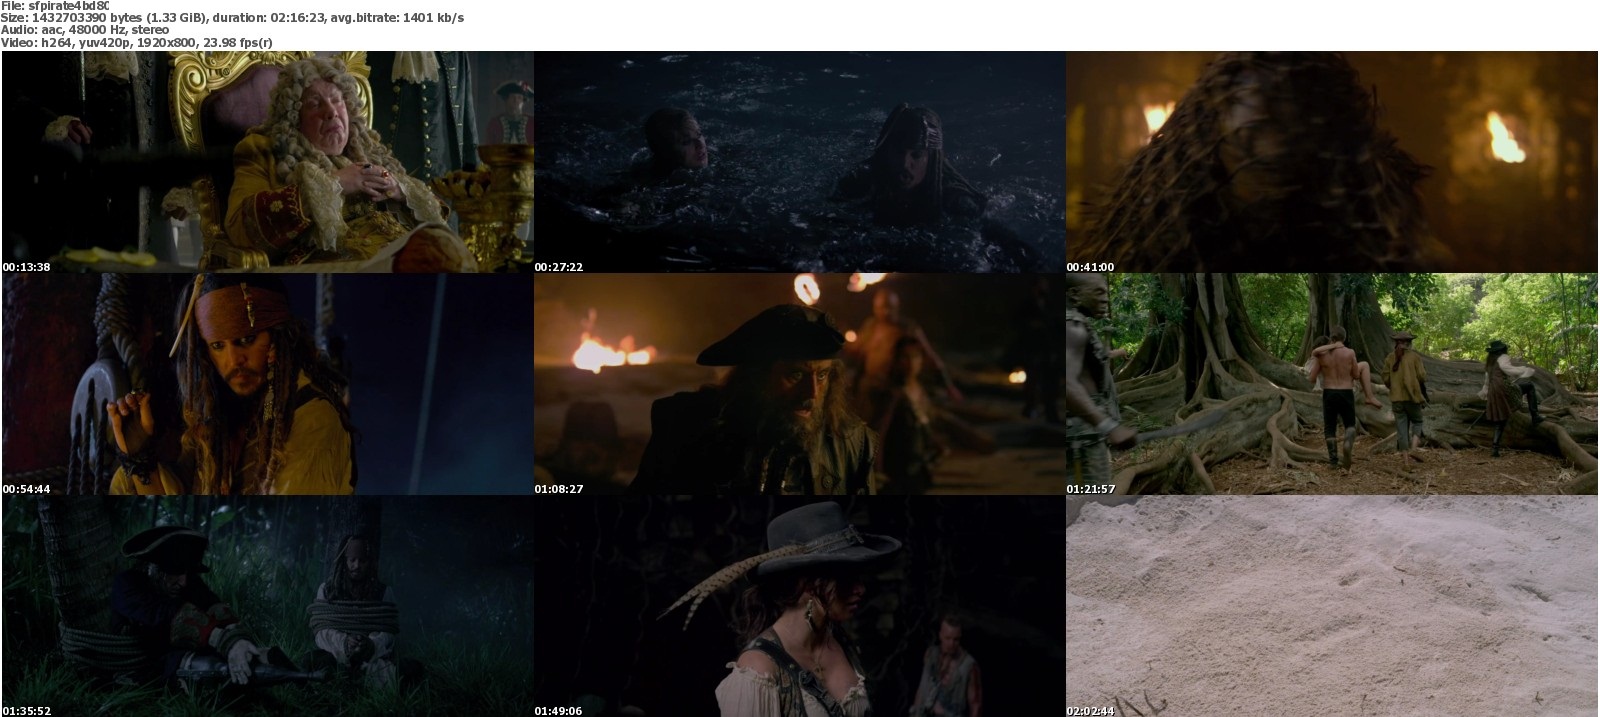 pirates of the caribbean 2 full movie online free hd